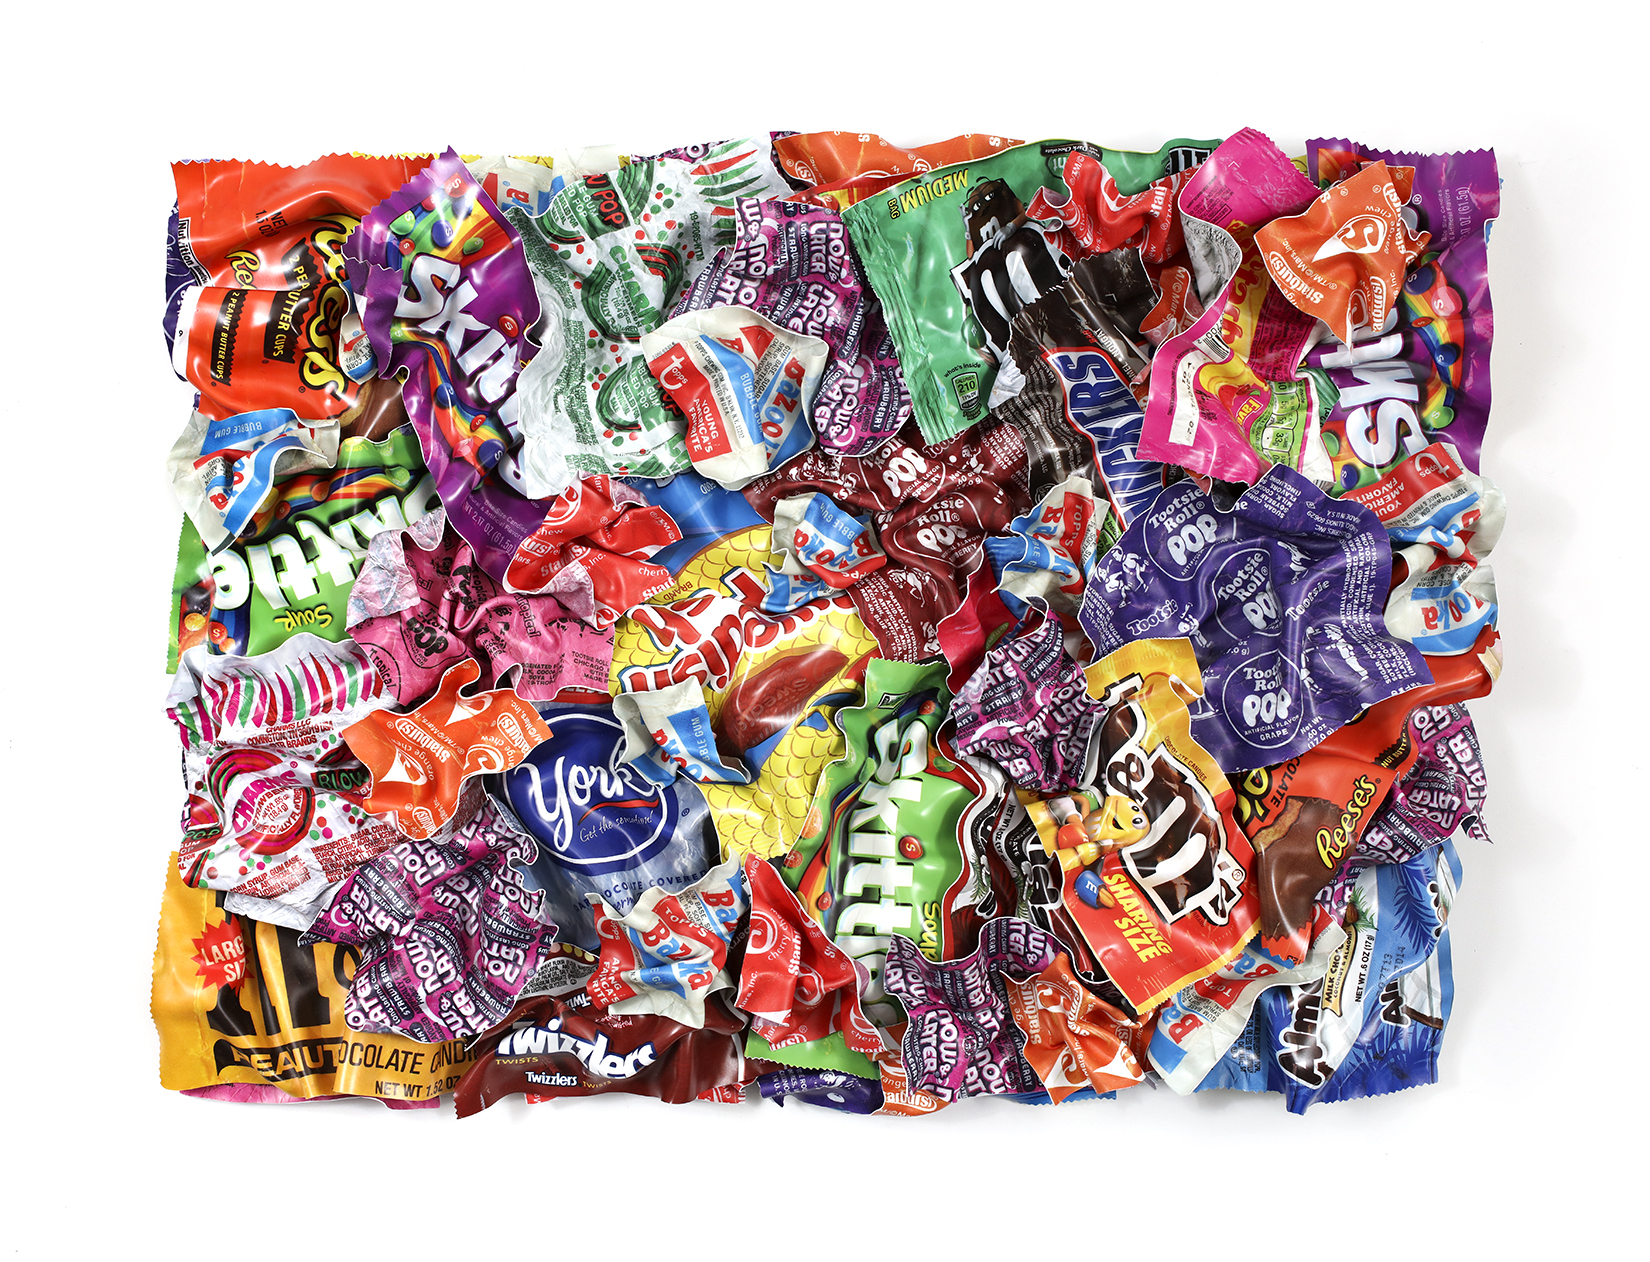 Paul Rousso - gallery - Candy Wrappers